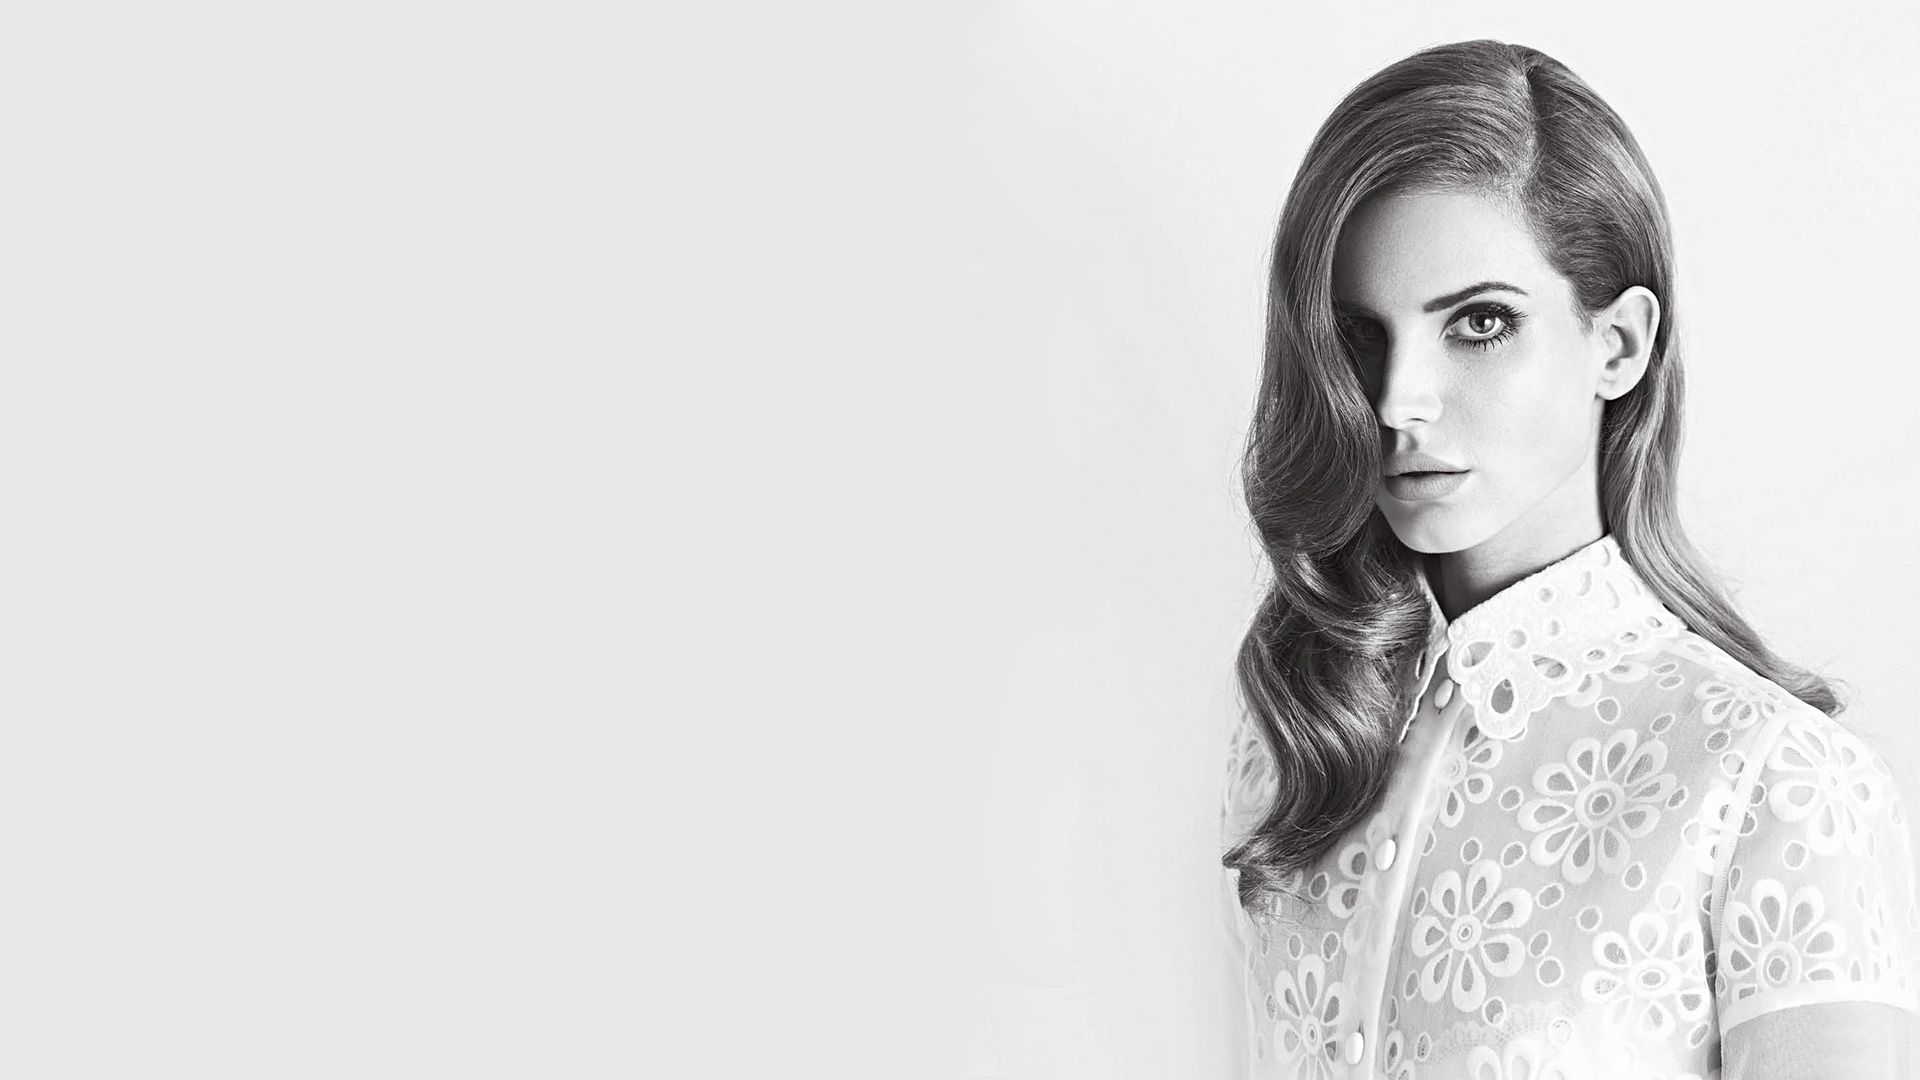 A black and white image of an attractive woman - Lana Del Rey